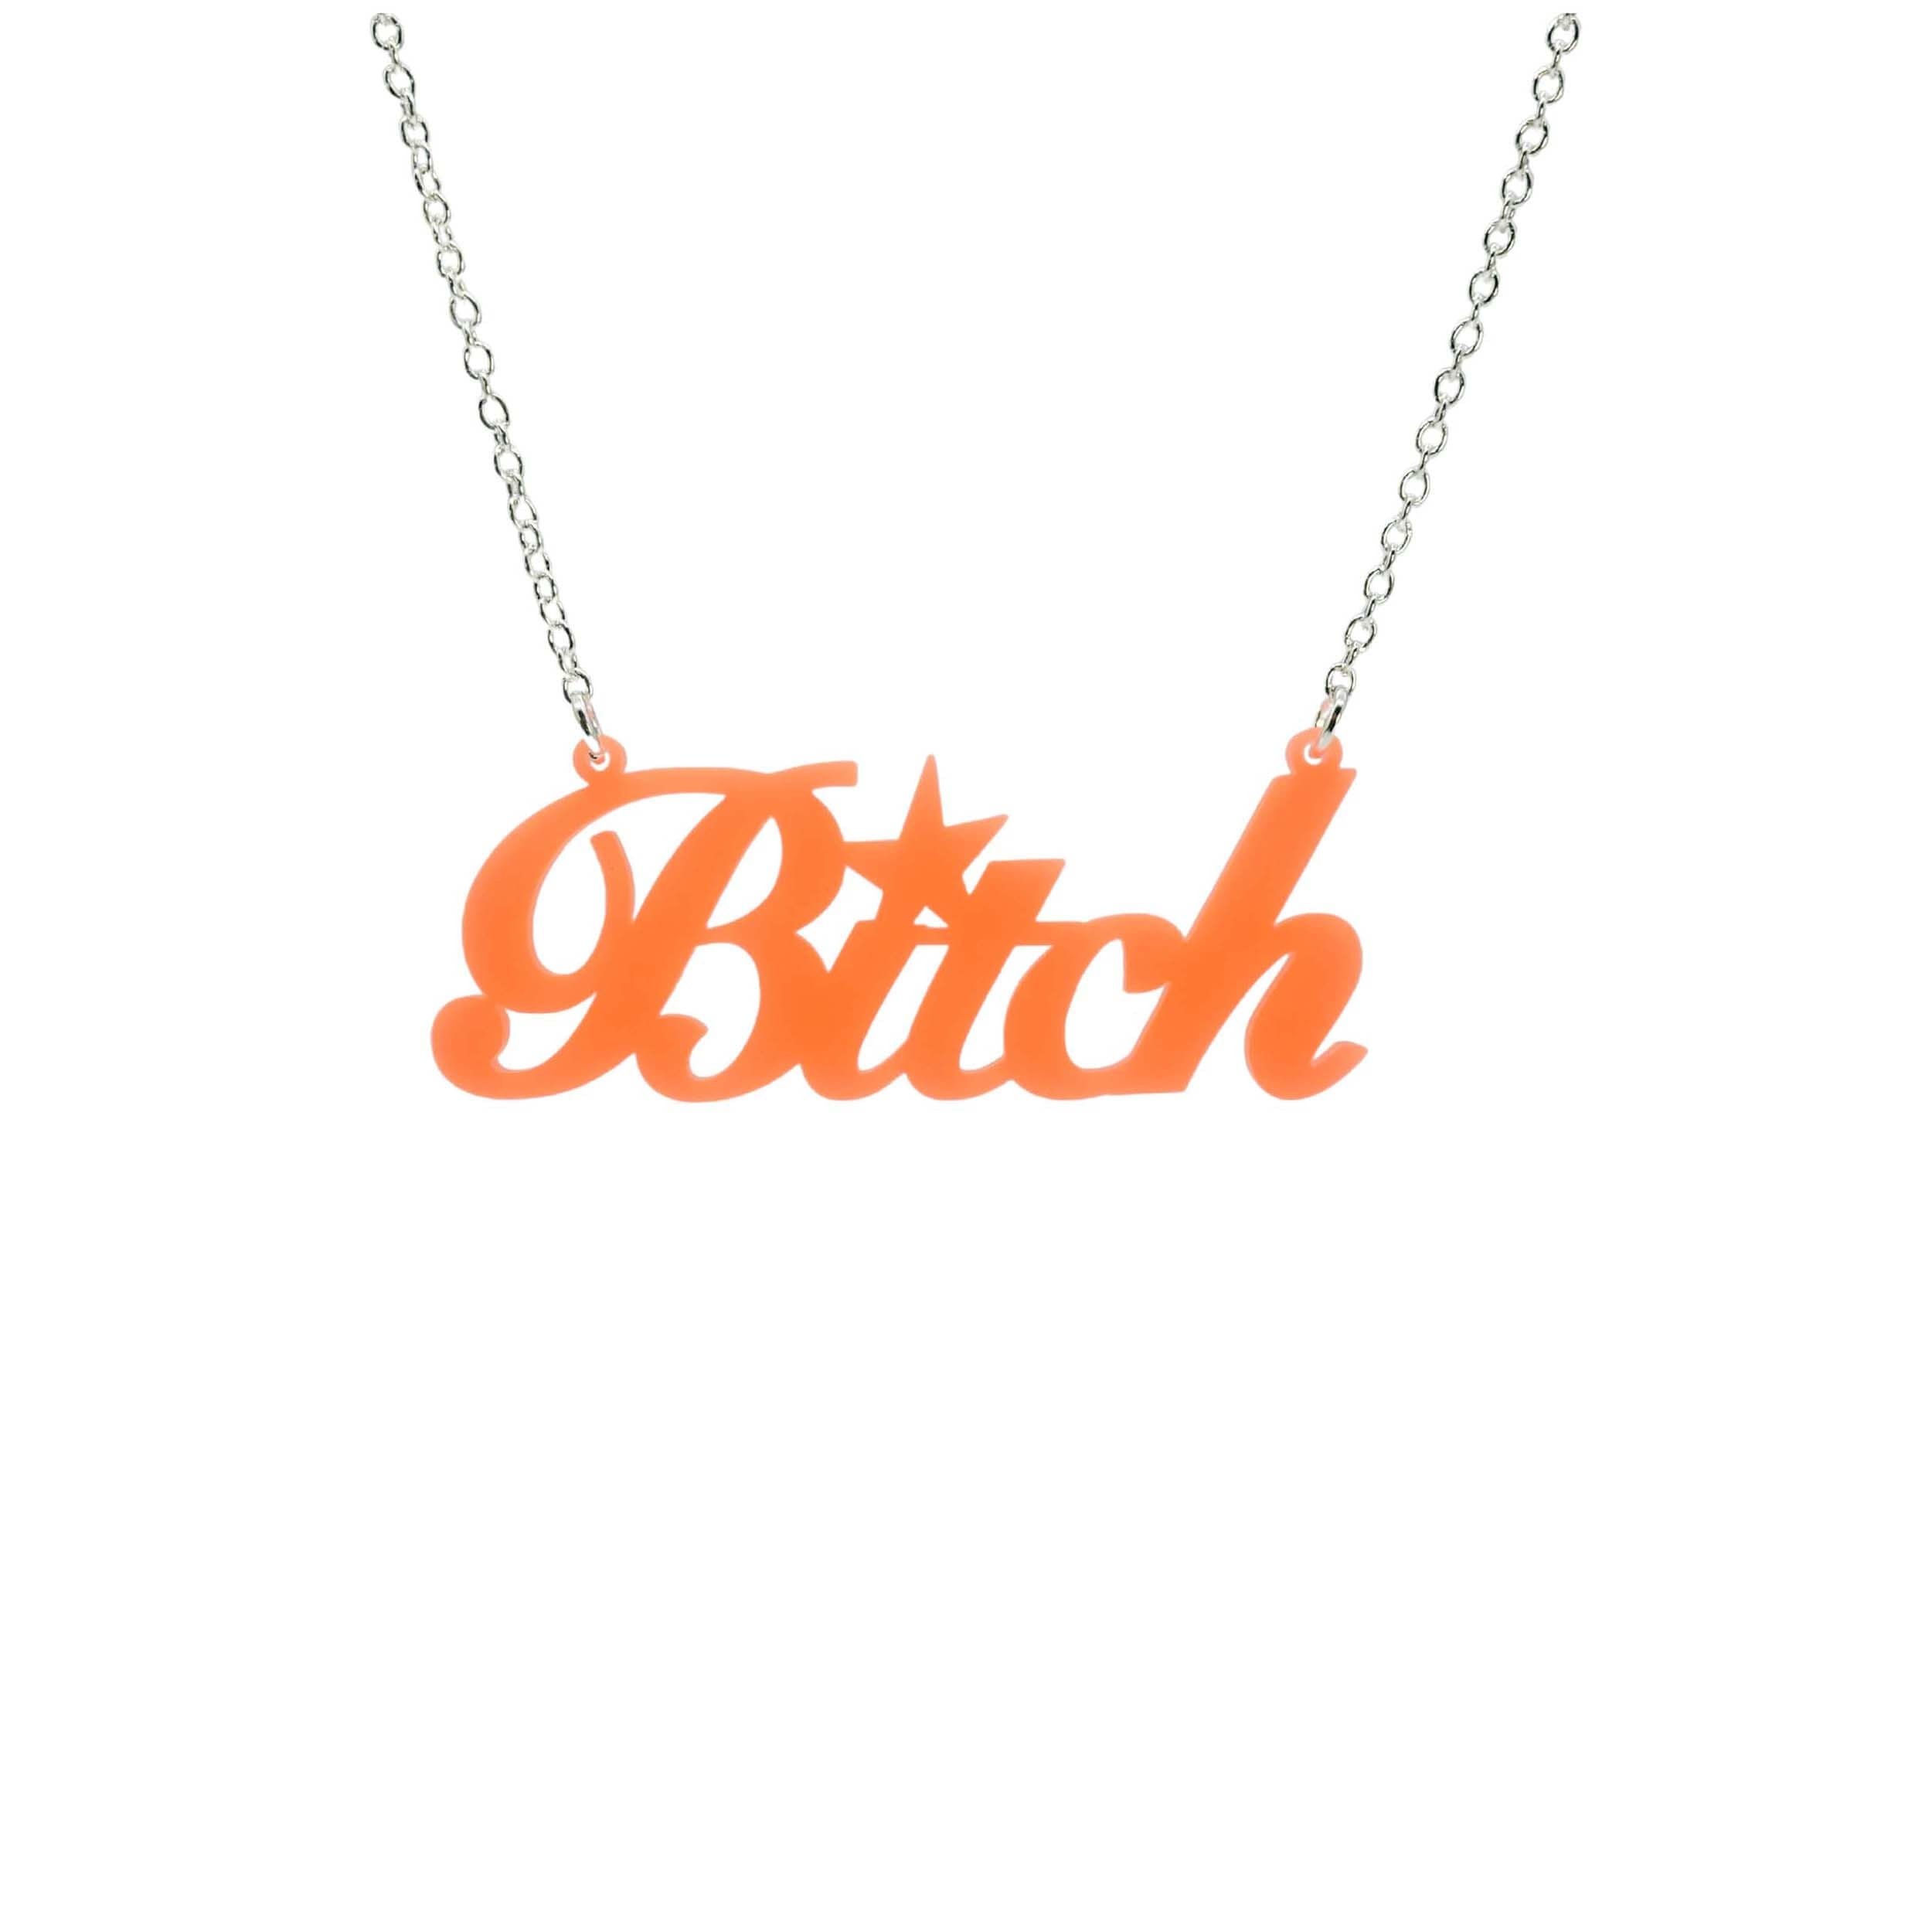 B*tch necklace in day-glo orange shown hanging against a white background. £2 goes to Bloody Good Period. 